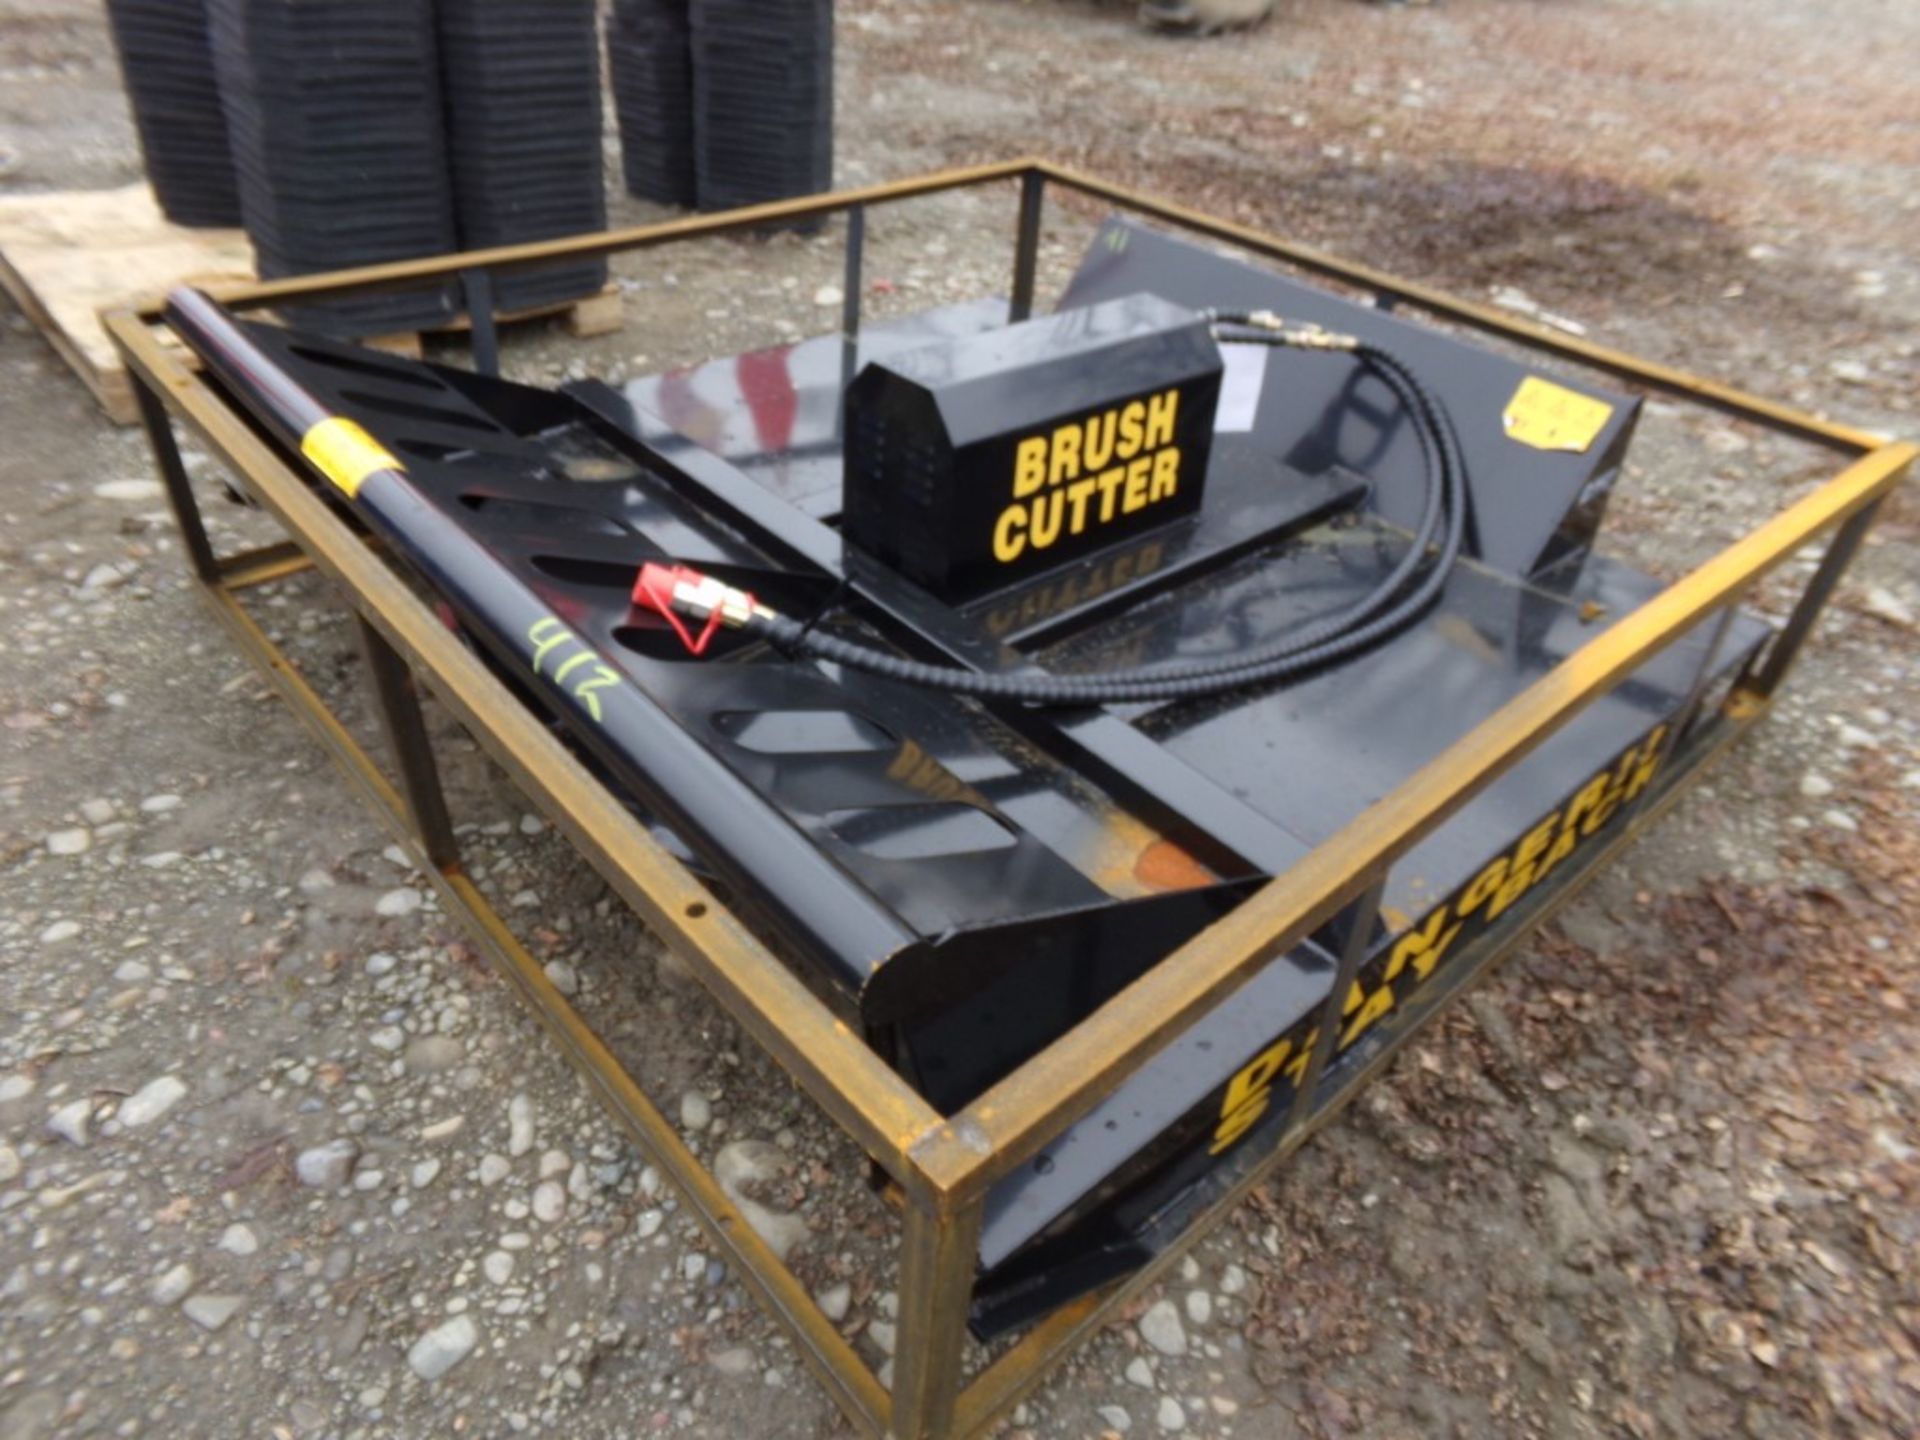 New, 72'' Skid Steer Brush Cutter, Check Gear Box Oil Before Use